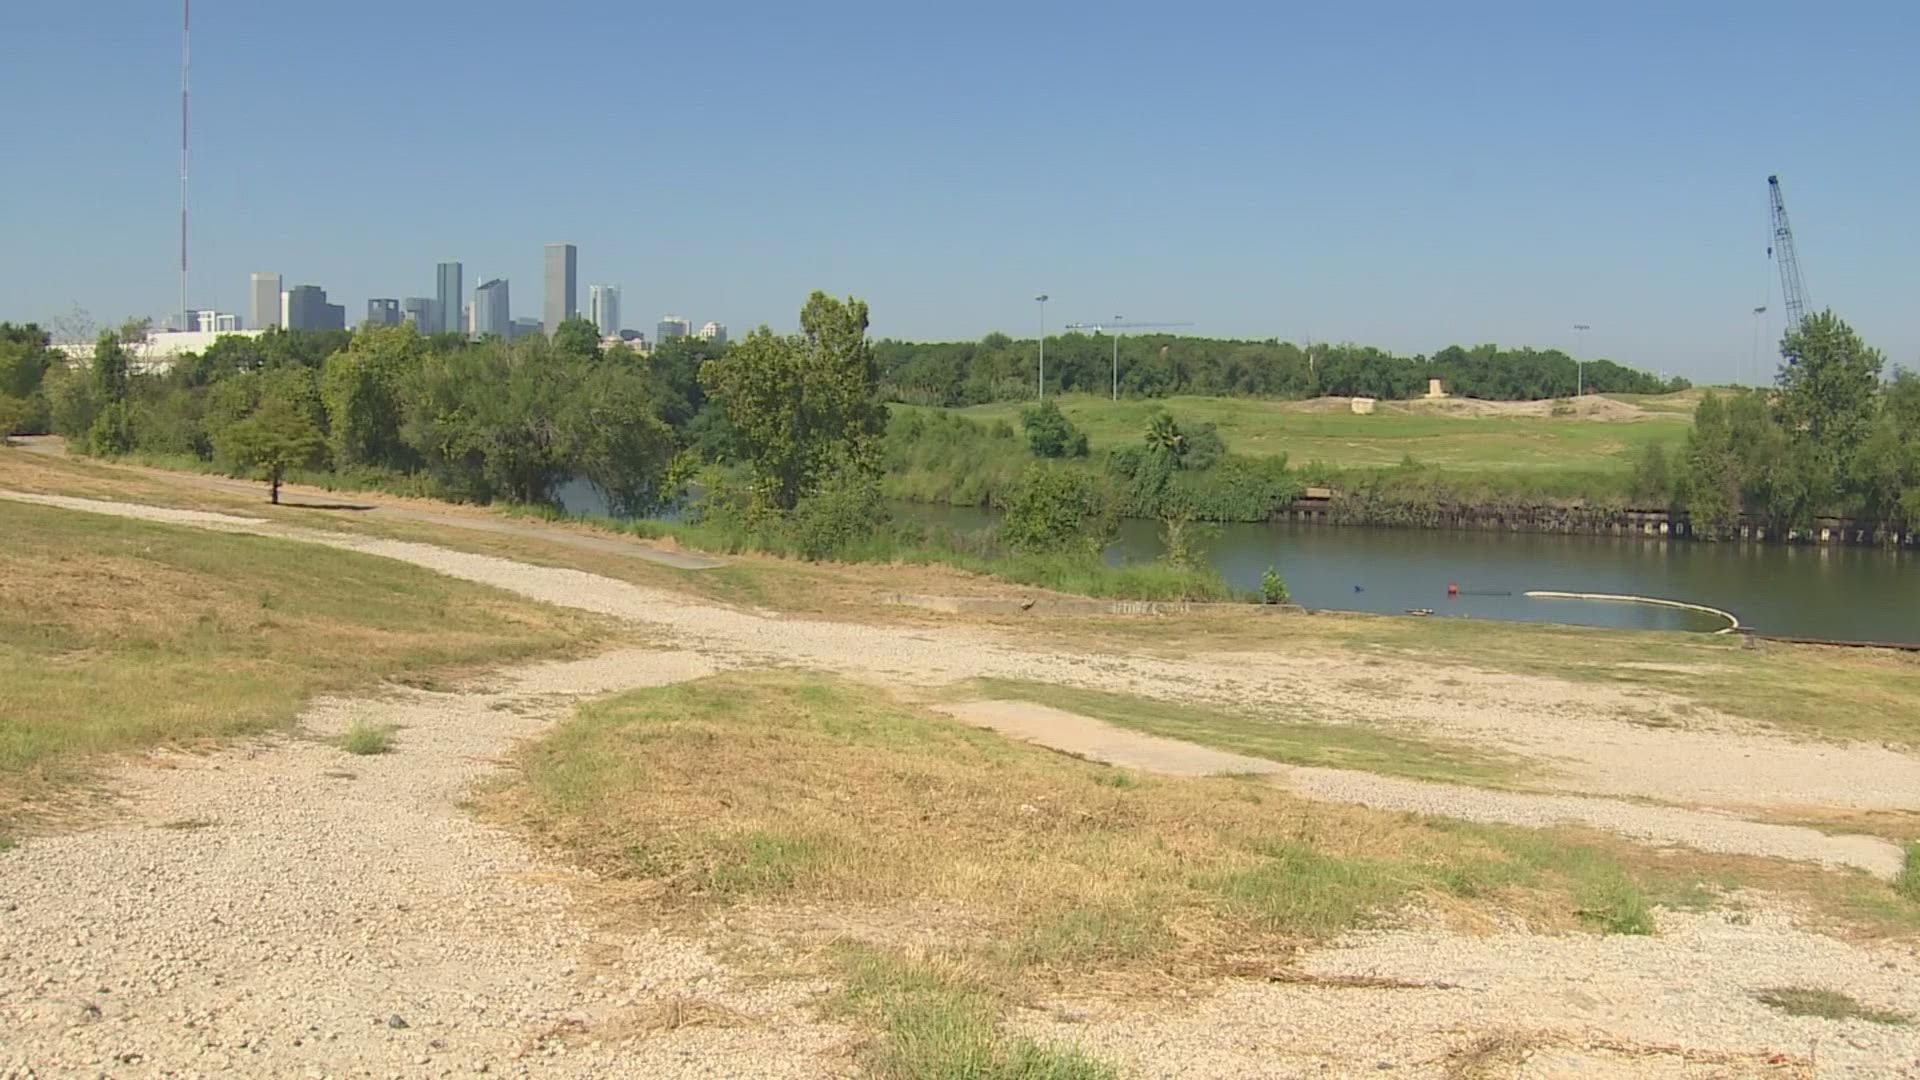 A project is getting started in Houston's Greater East End and Fifth Ward that will bring new trails and a library to the beautiful green space along Buffalo Bayou.